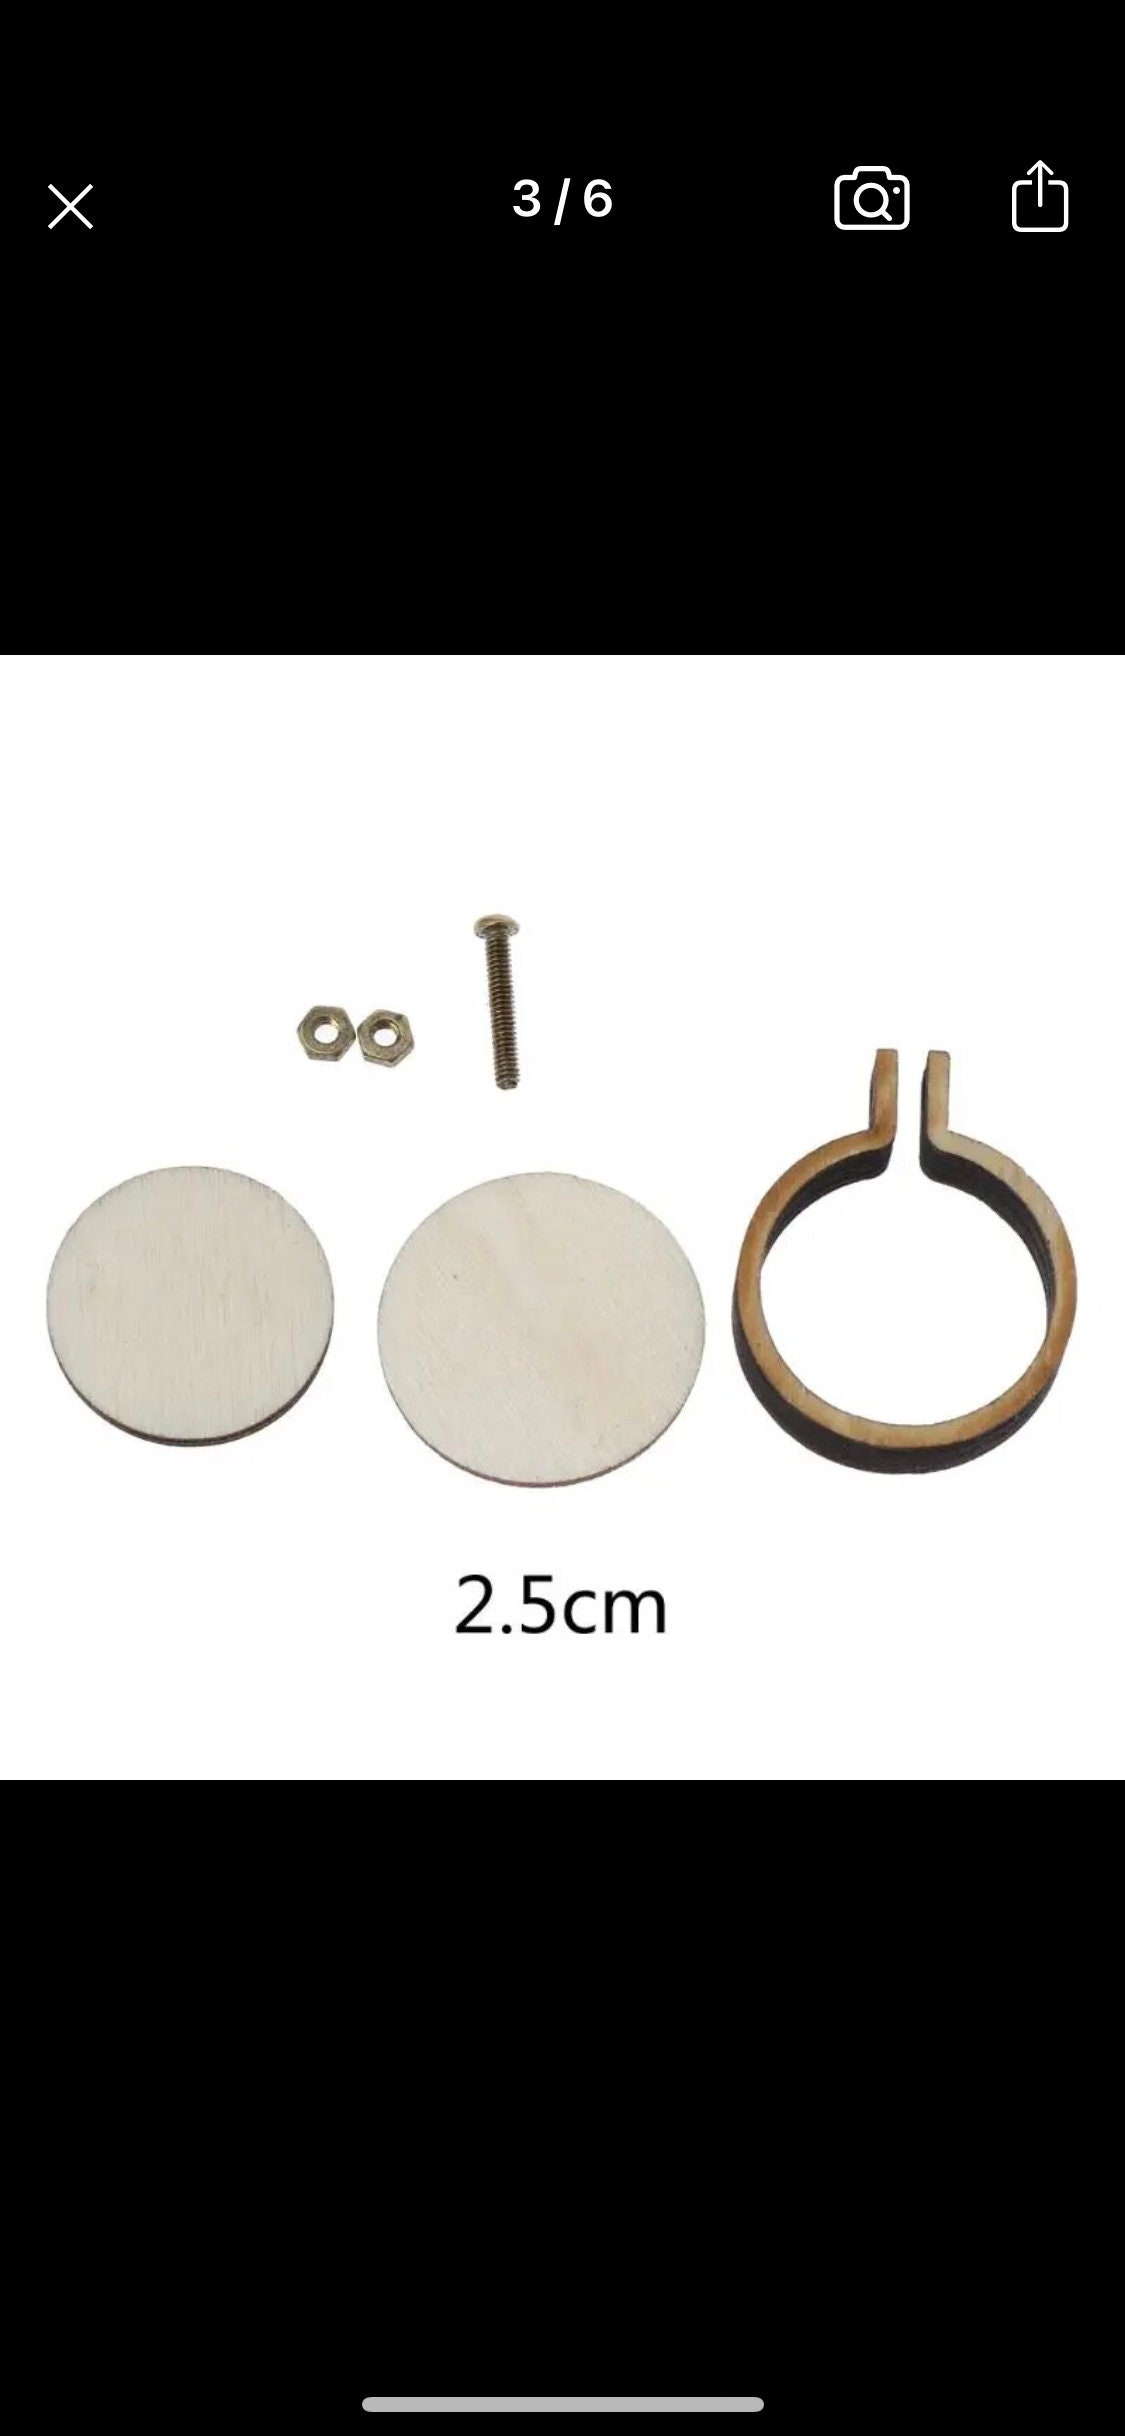 1x Small Embroidery Wooden Hoops, Small Frames, Small Embroidery Hoops, Mini  Hoops Pendants, Mini Round Wooden Hoop, Wooden Frames 